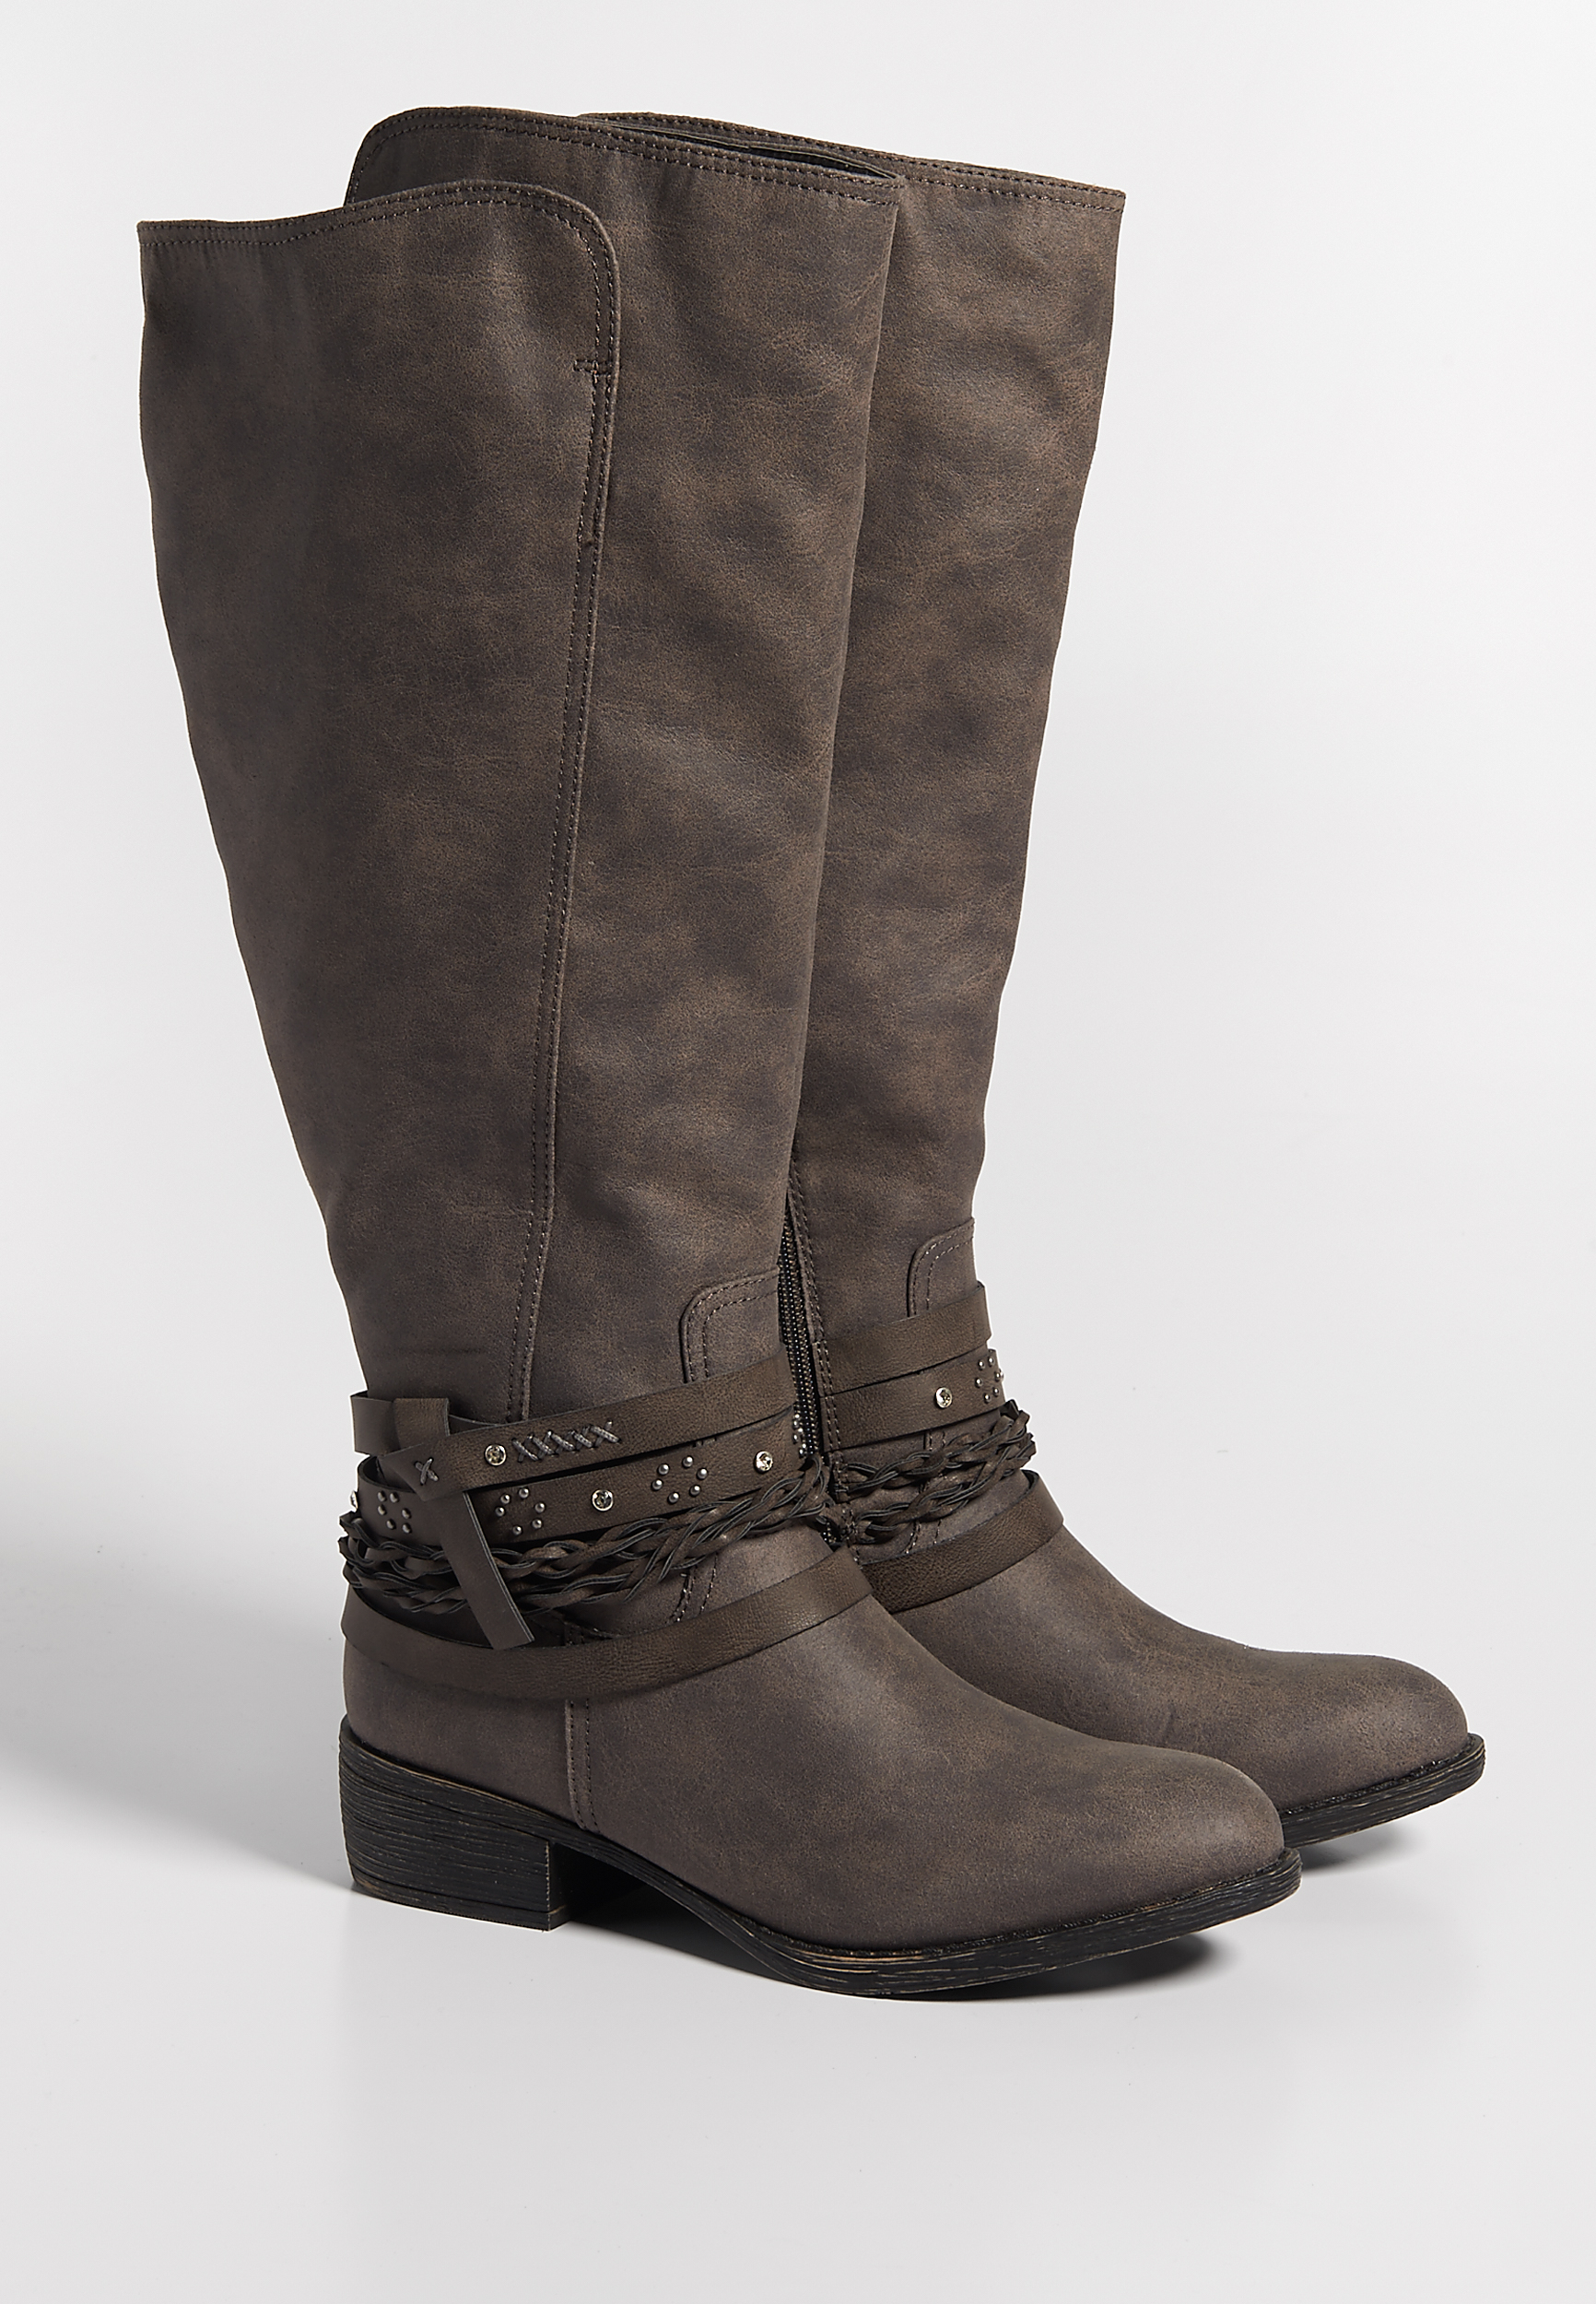 Gretchen wide calf tall boot | maurices